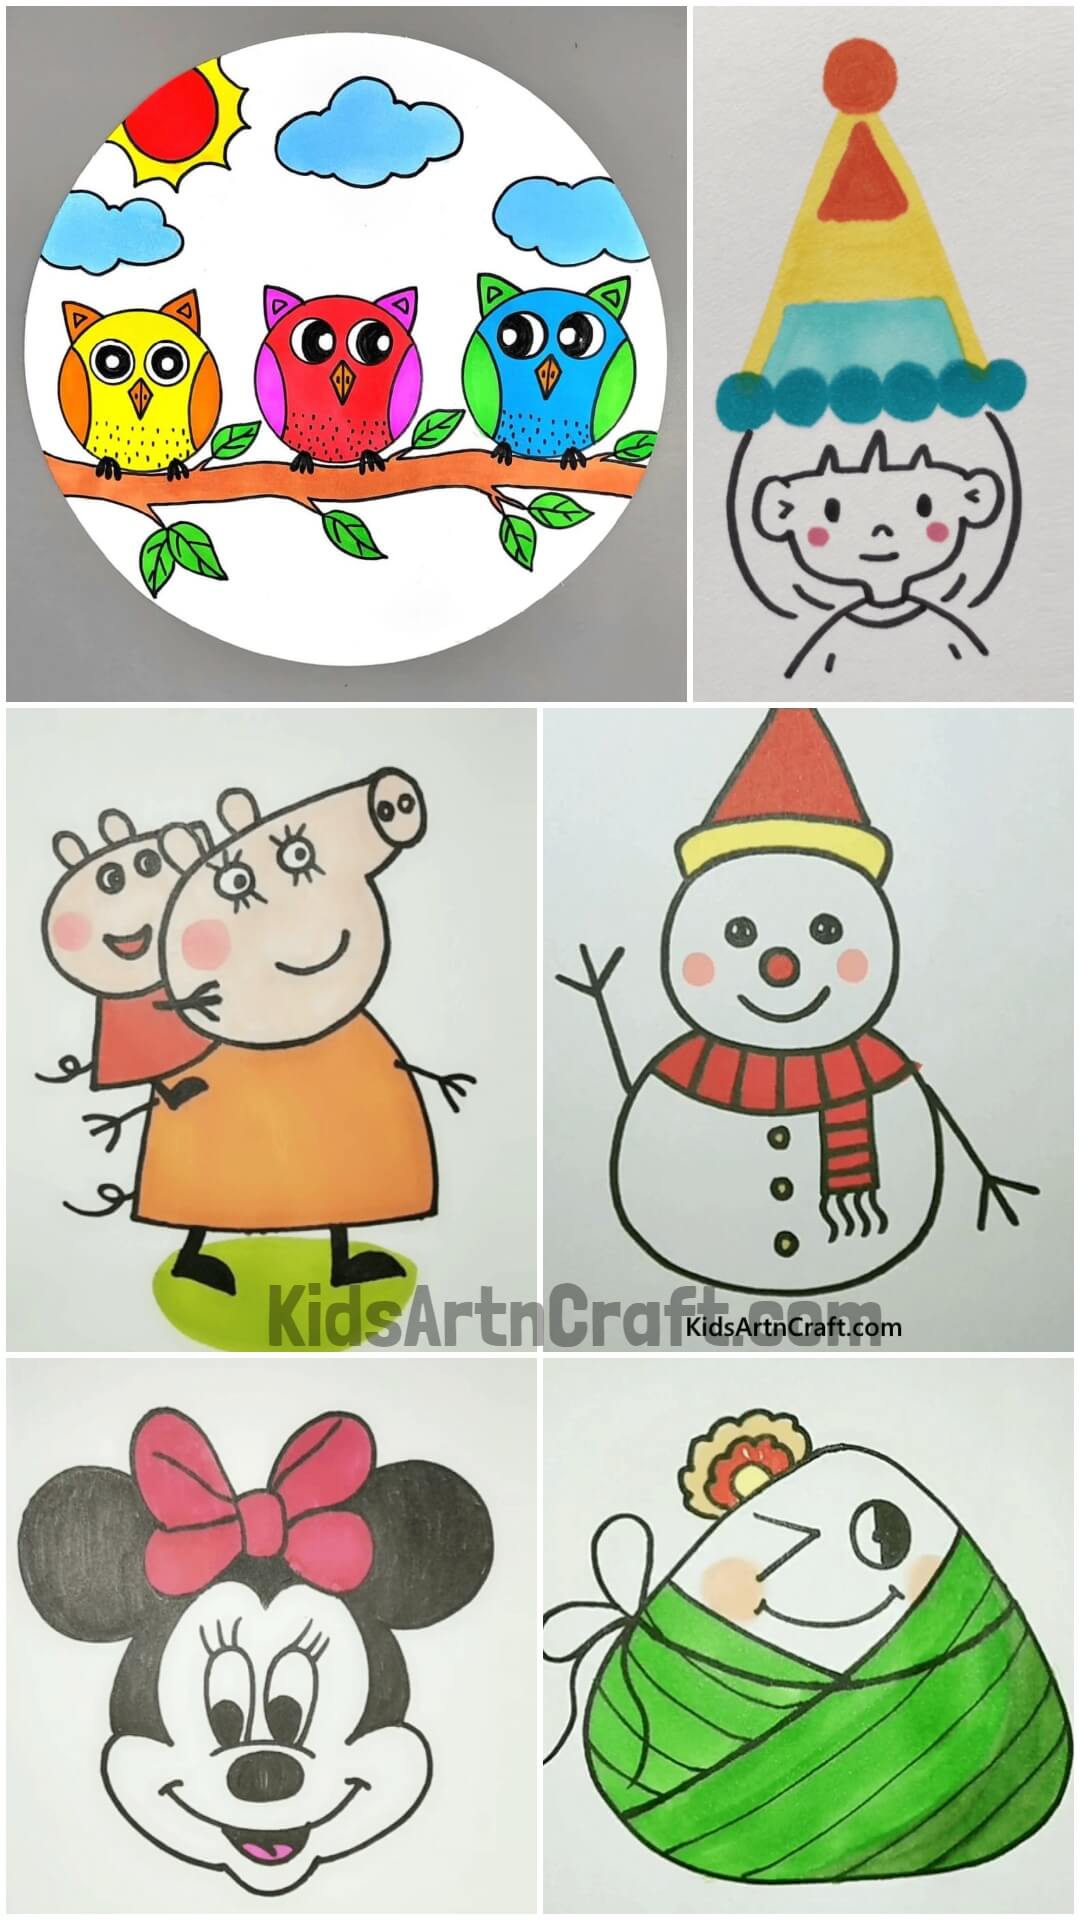 Easy Drawing For Kids To Improve Their Skills